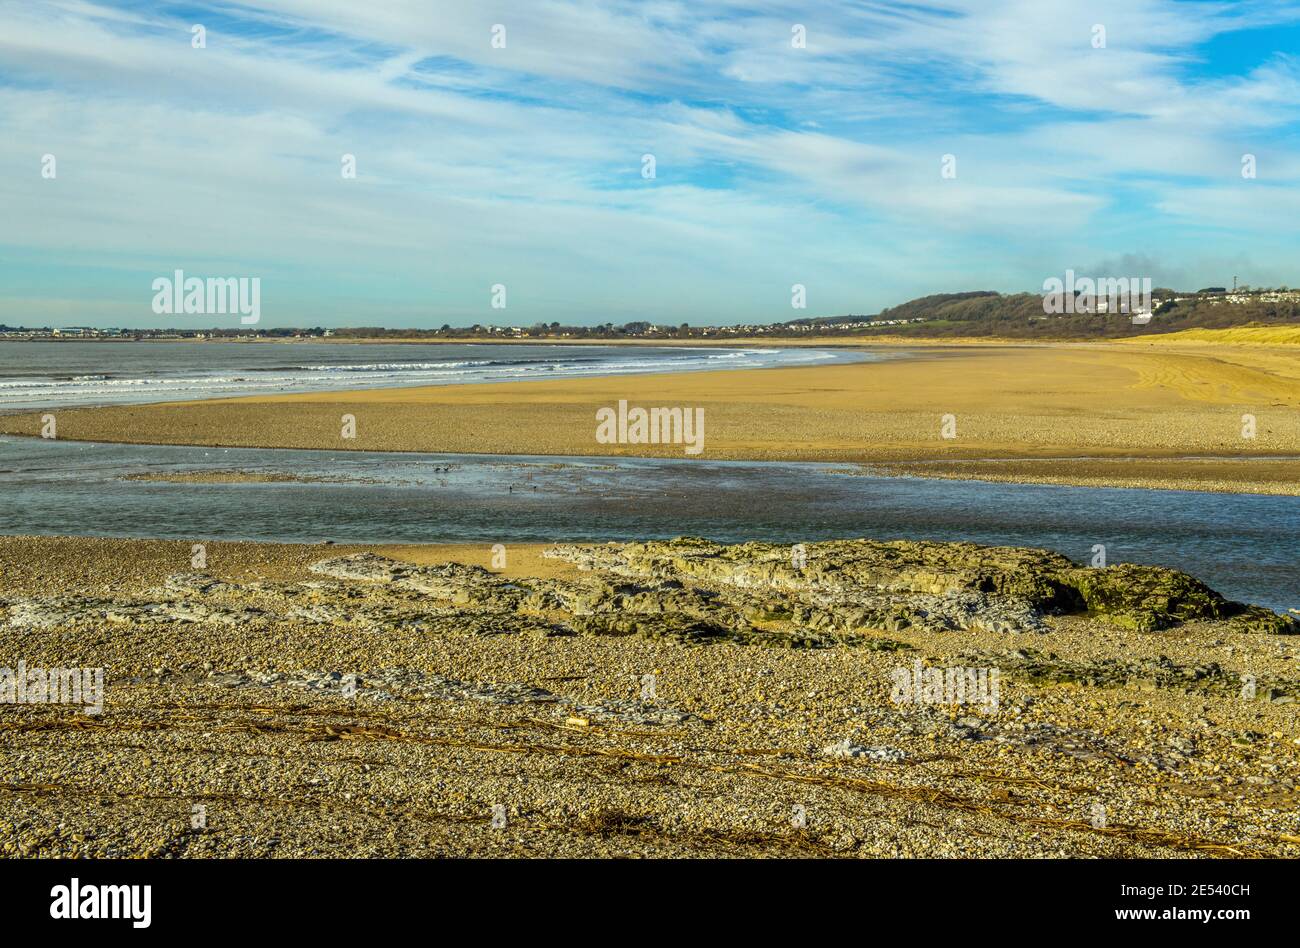 The Bristol Channel where the River Ogmore enters via the estuary, at Ogmore by Sra, in the Vale of Glamorgan, south Wales.. Stock Photo